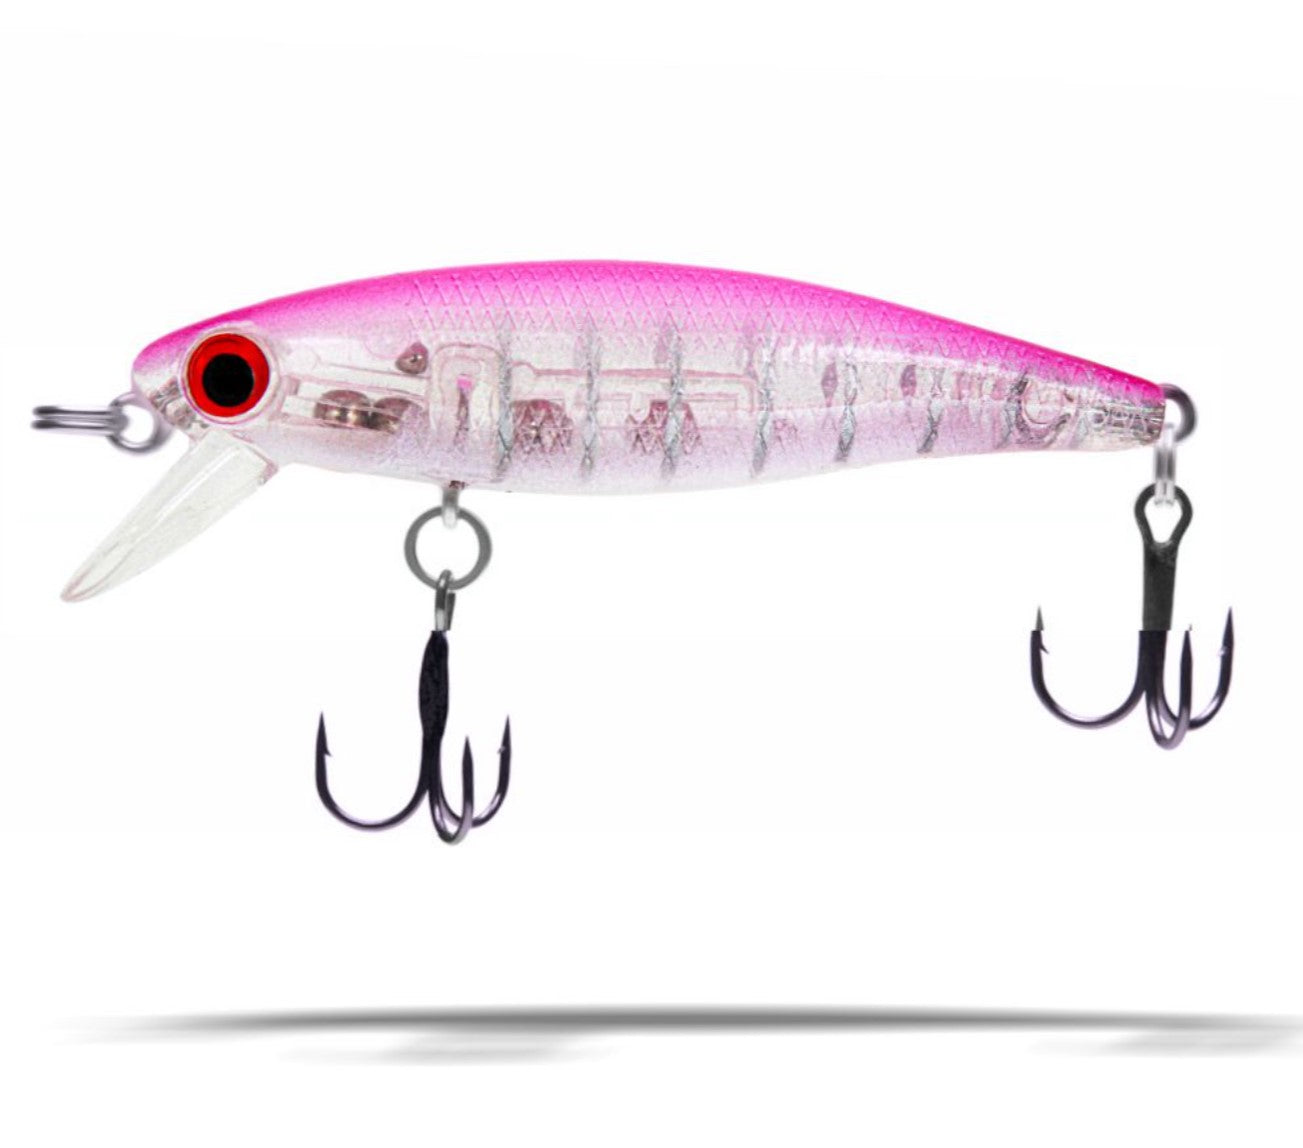 Dynamic Lures HD Trout (Bubble Gum) – Trophy Trout Lures and Fly